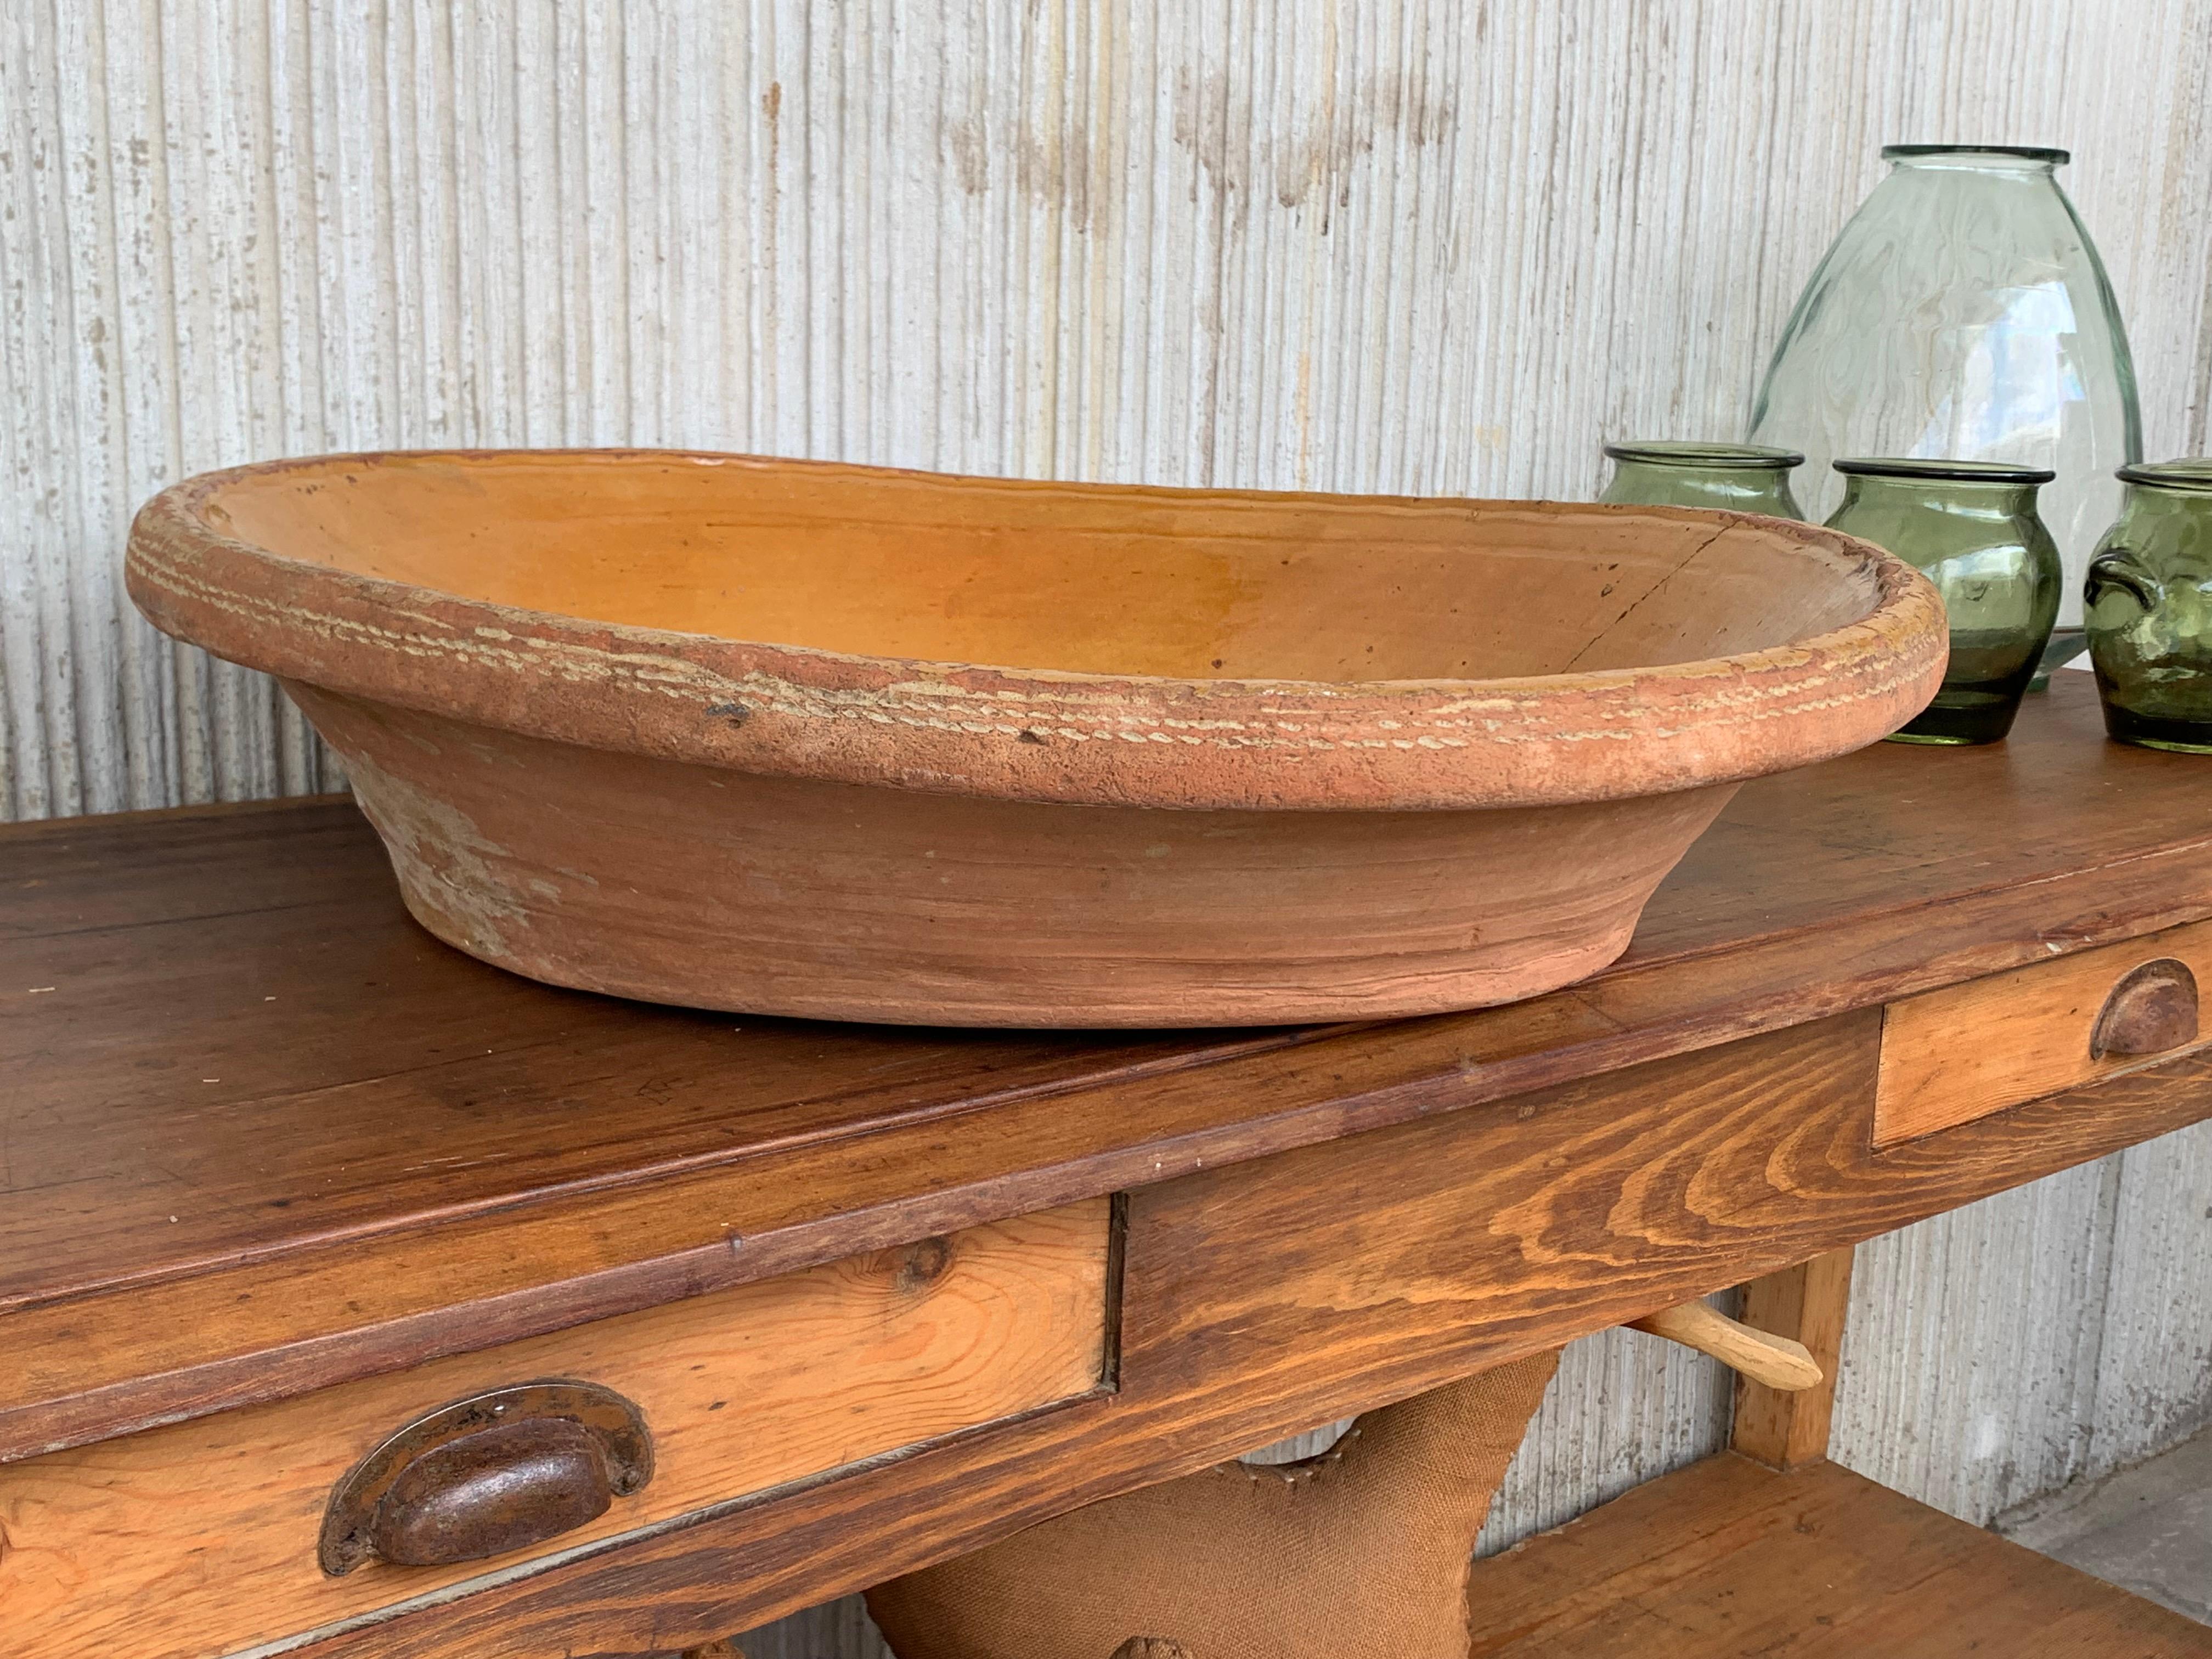 Spanish Colonial 19th Century Spanish Hand Thrown and Glazed Mustard Brown Stoneware Pottery Bowl For Sale